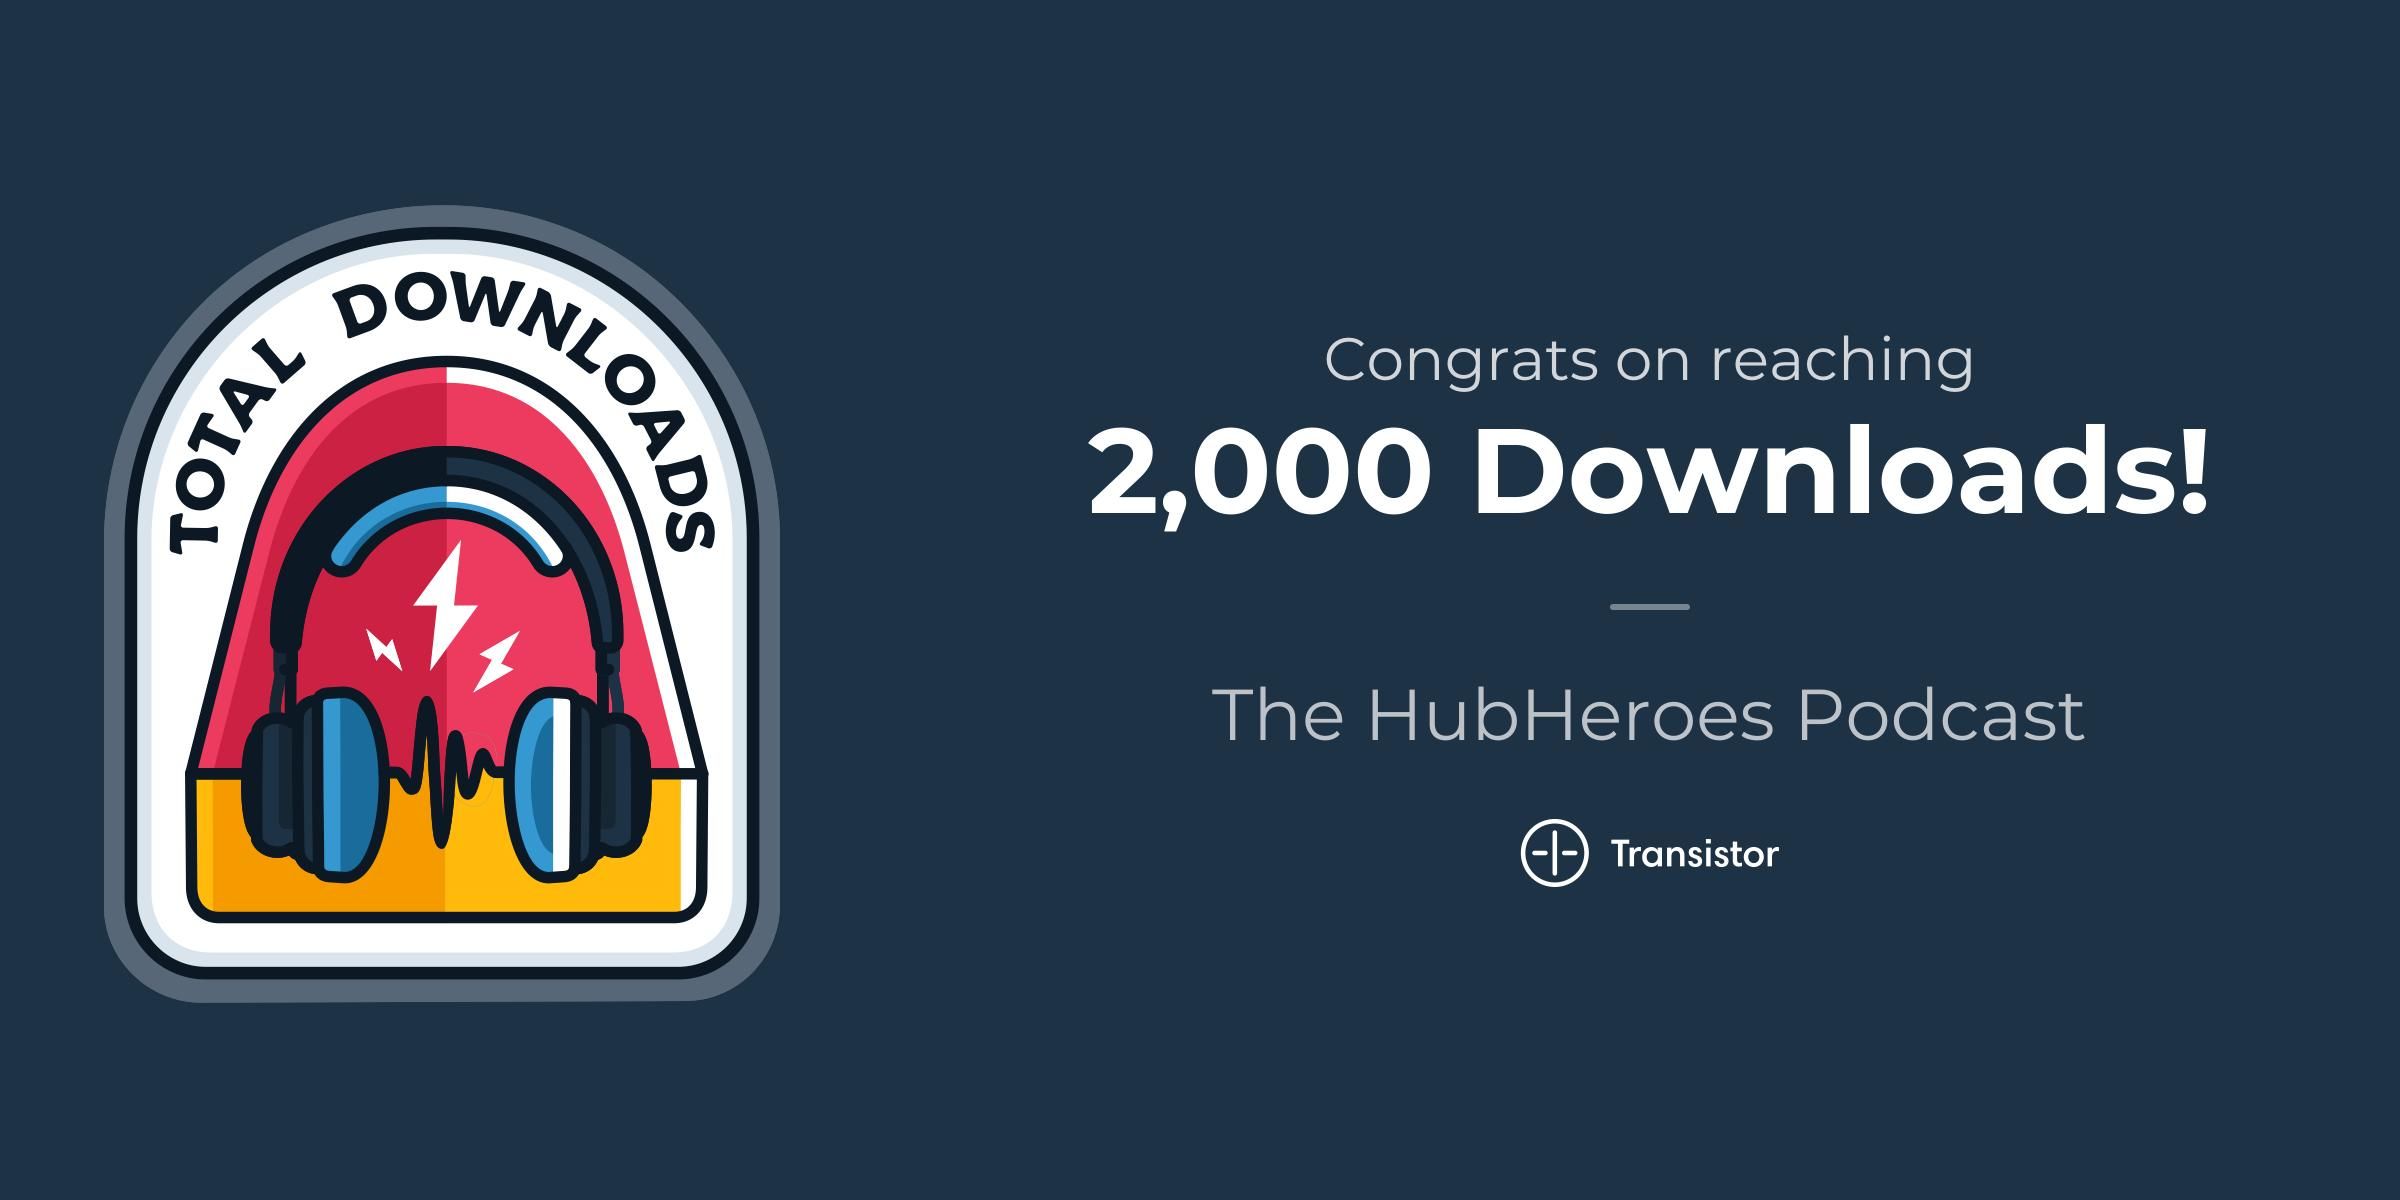 the-hubheroes-podcast-total_downloads-2000